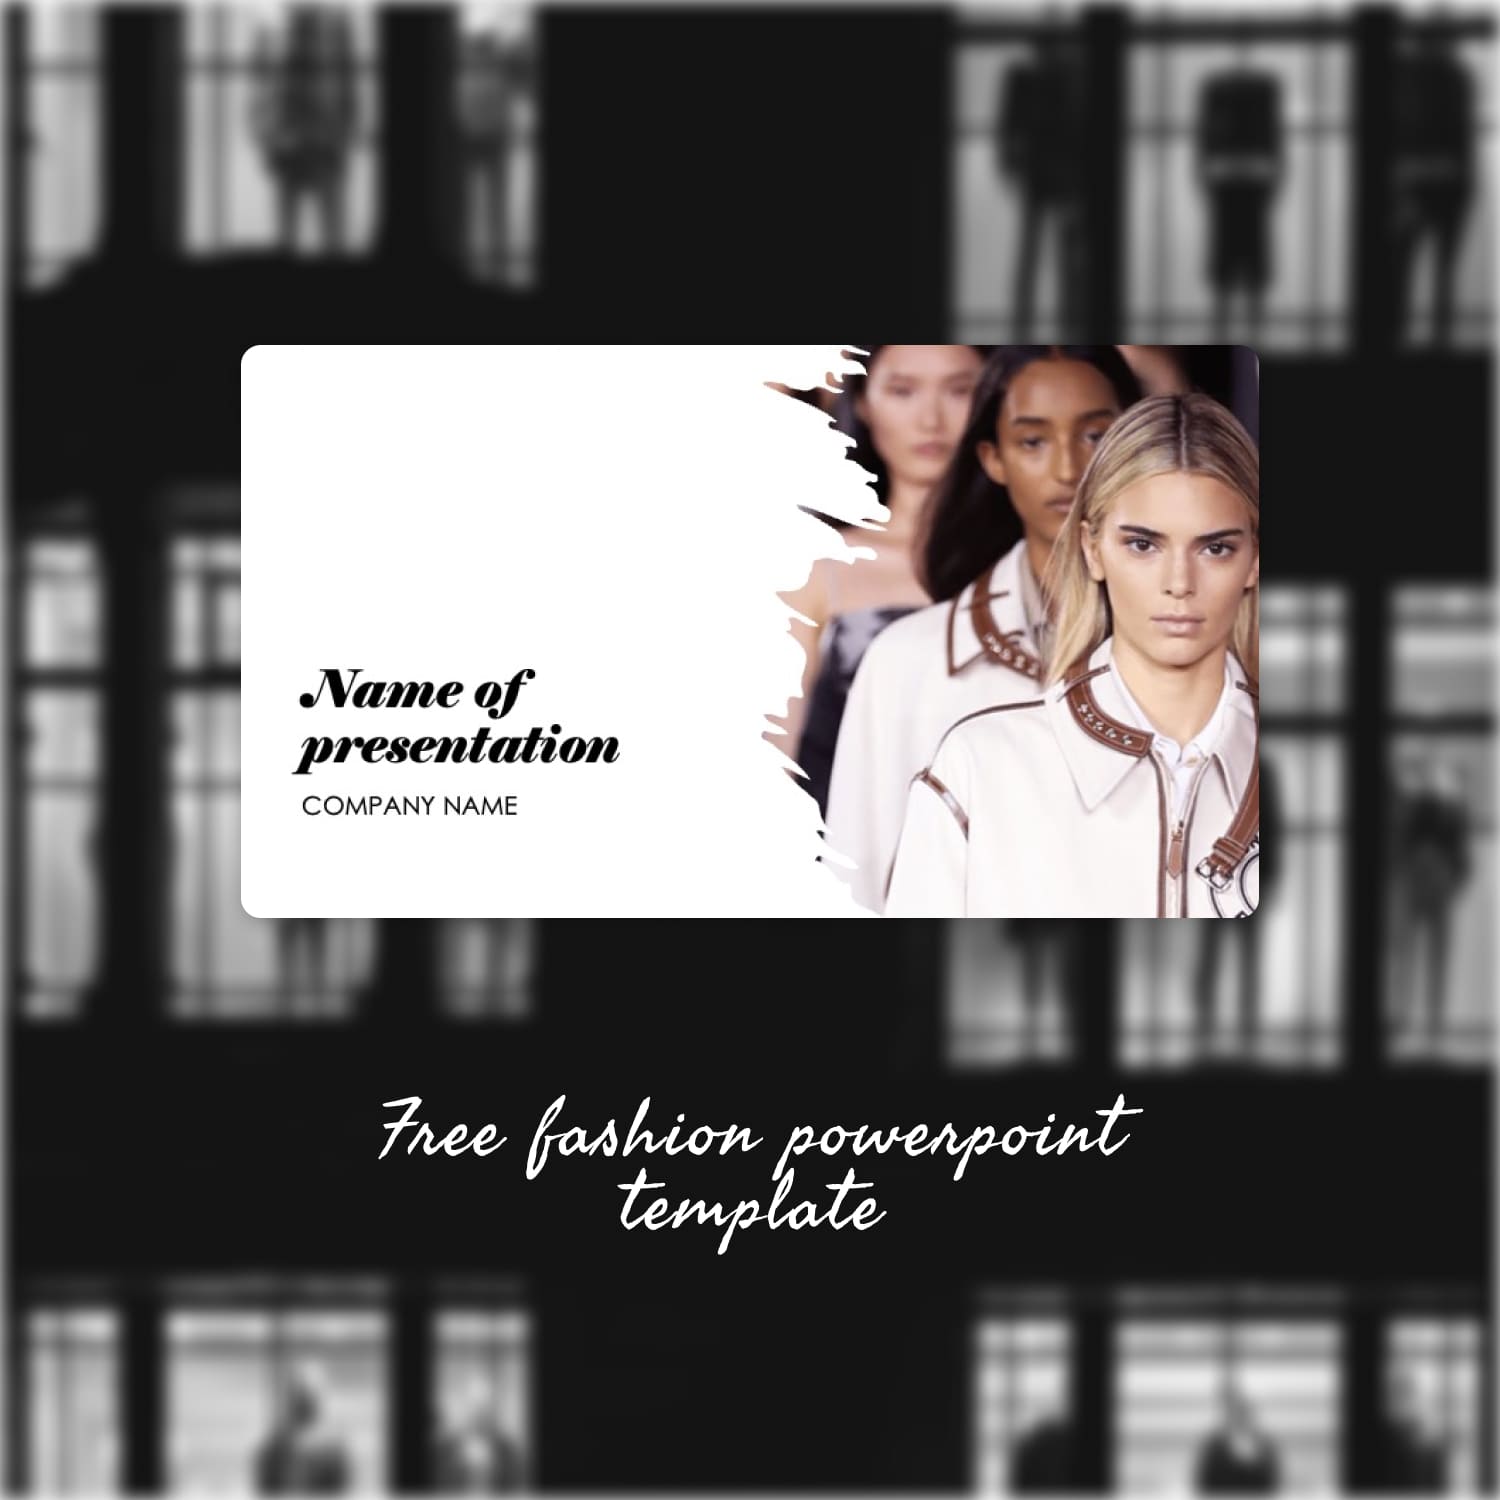 1500 1 Free Fashion Powerpoint Template.